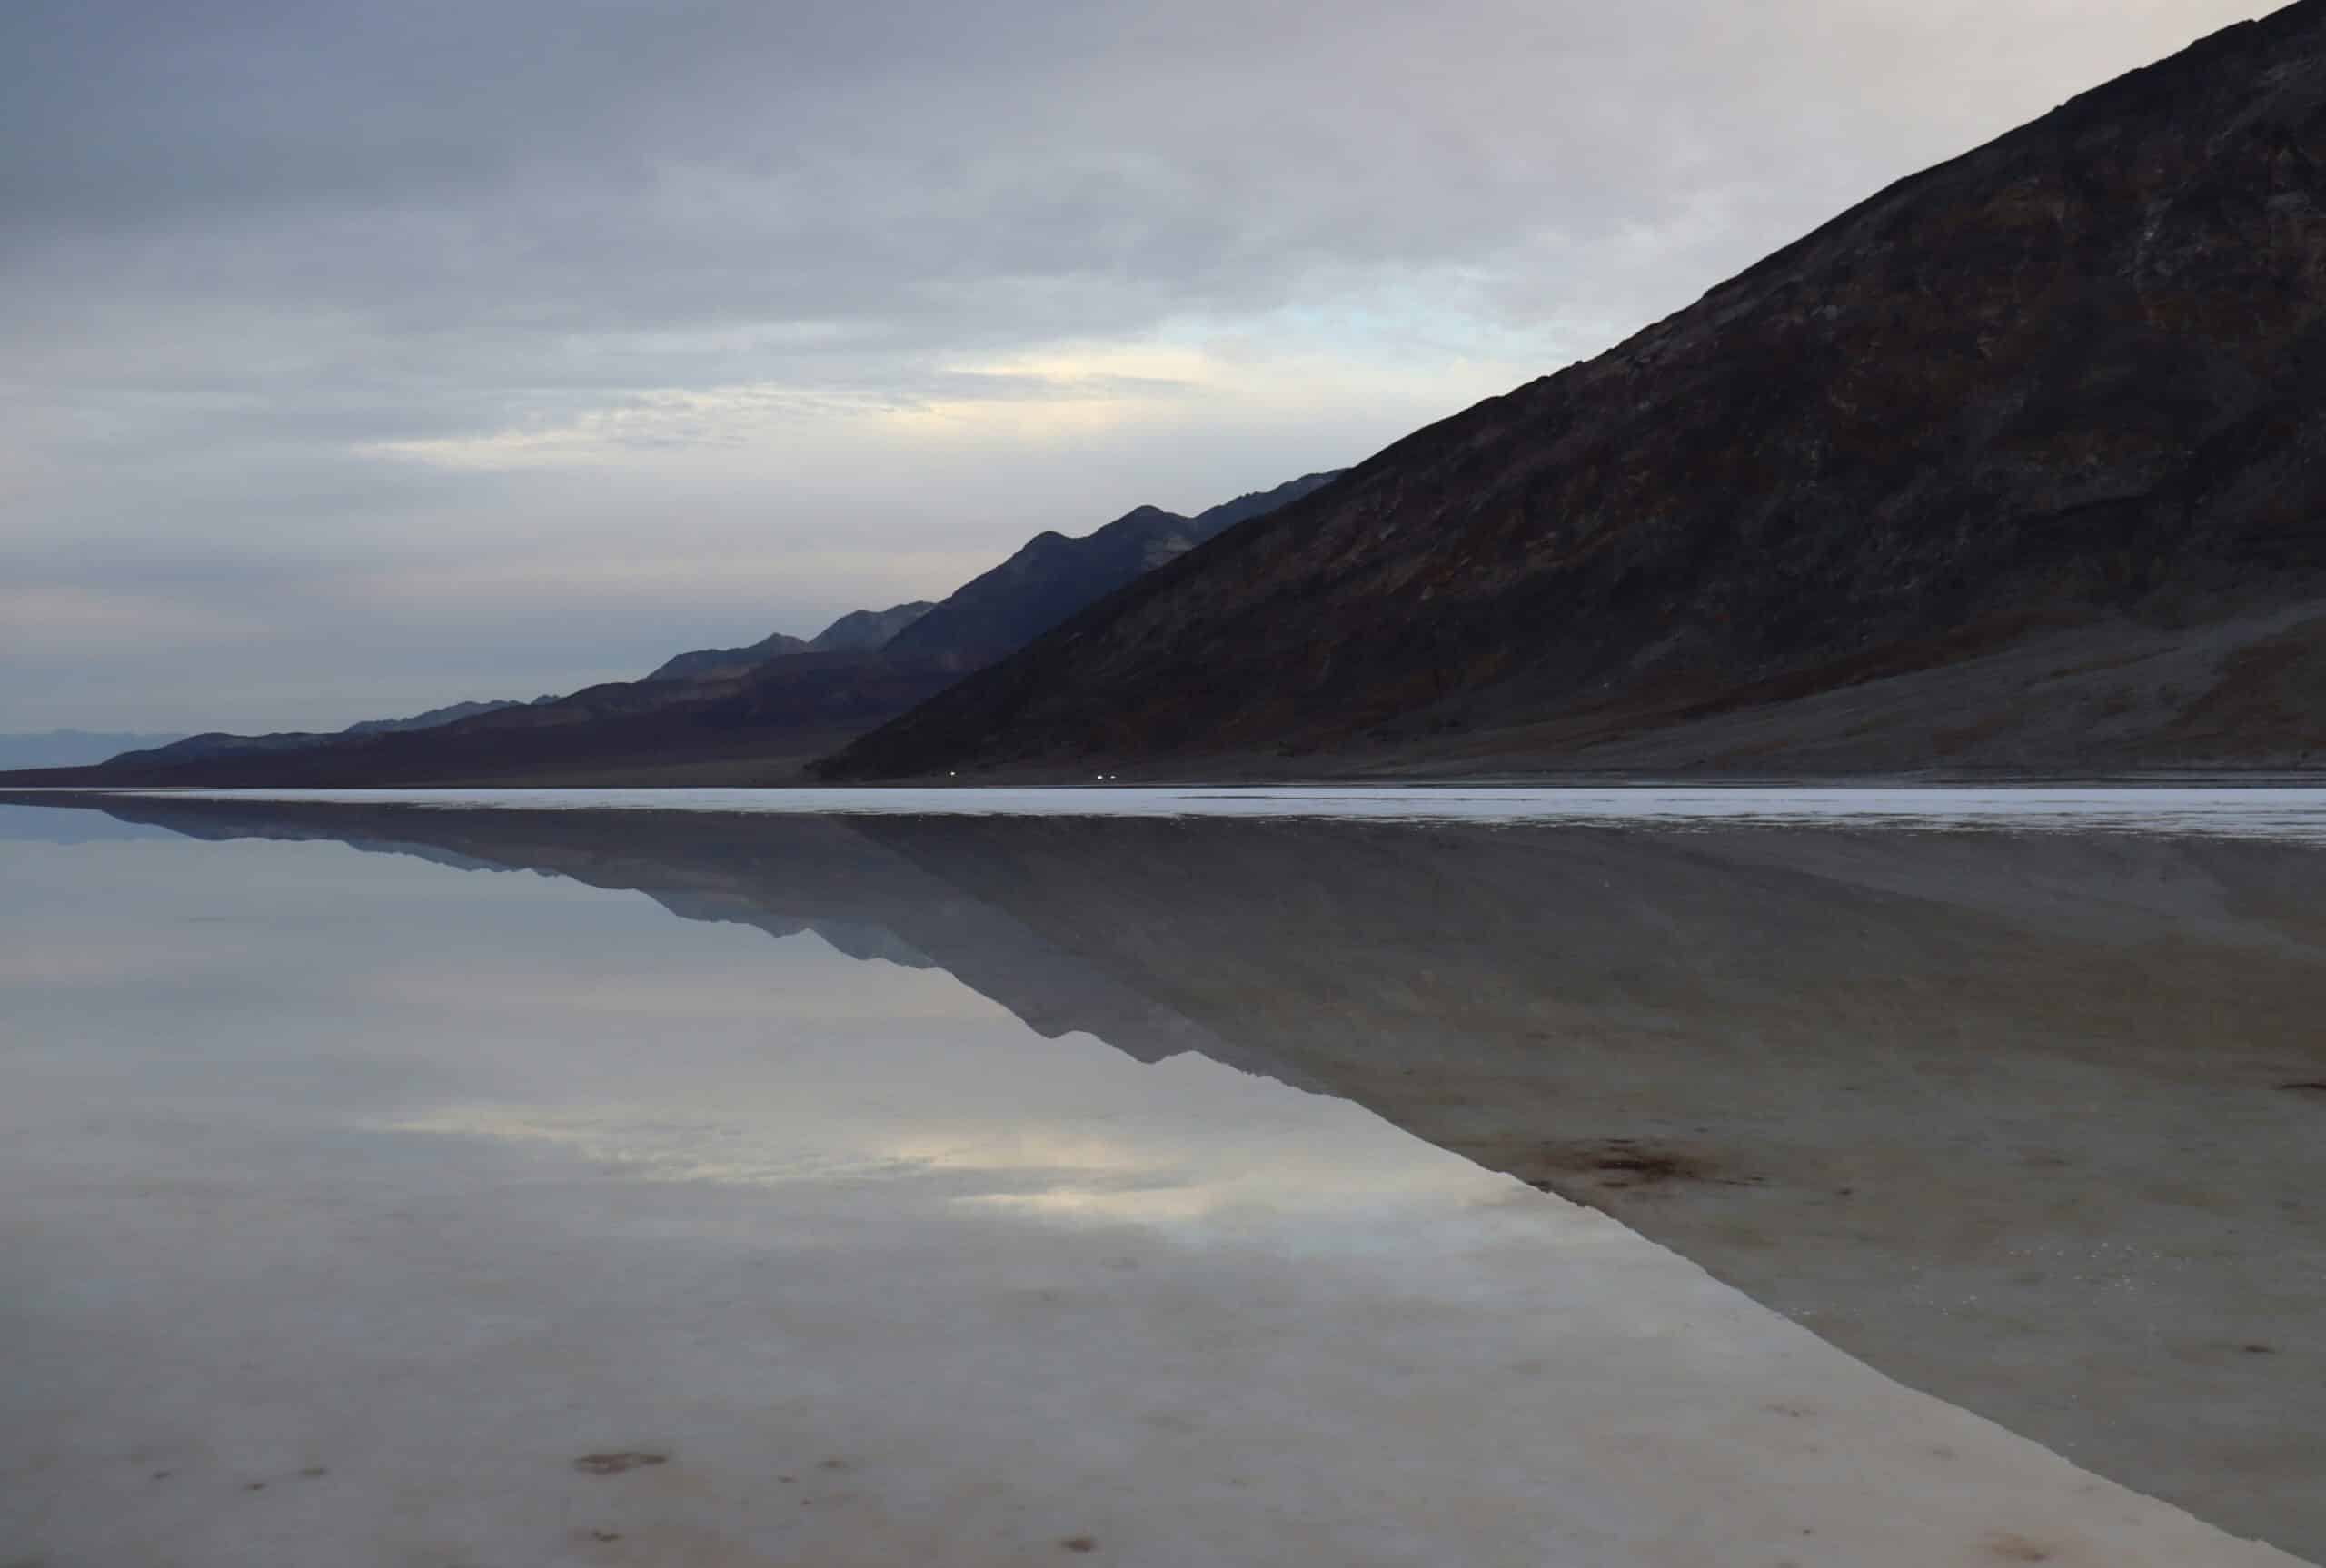 An image of the Death Valley National Park lake that formed in Badwater Basin